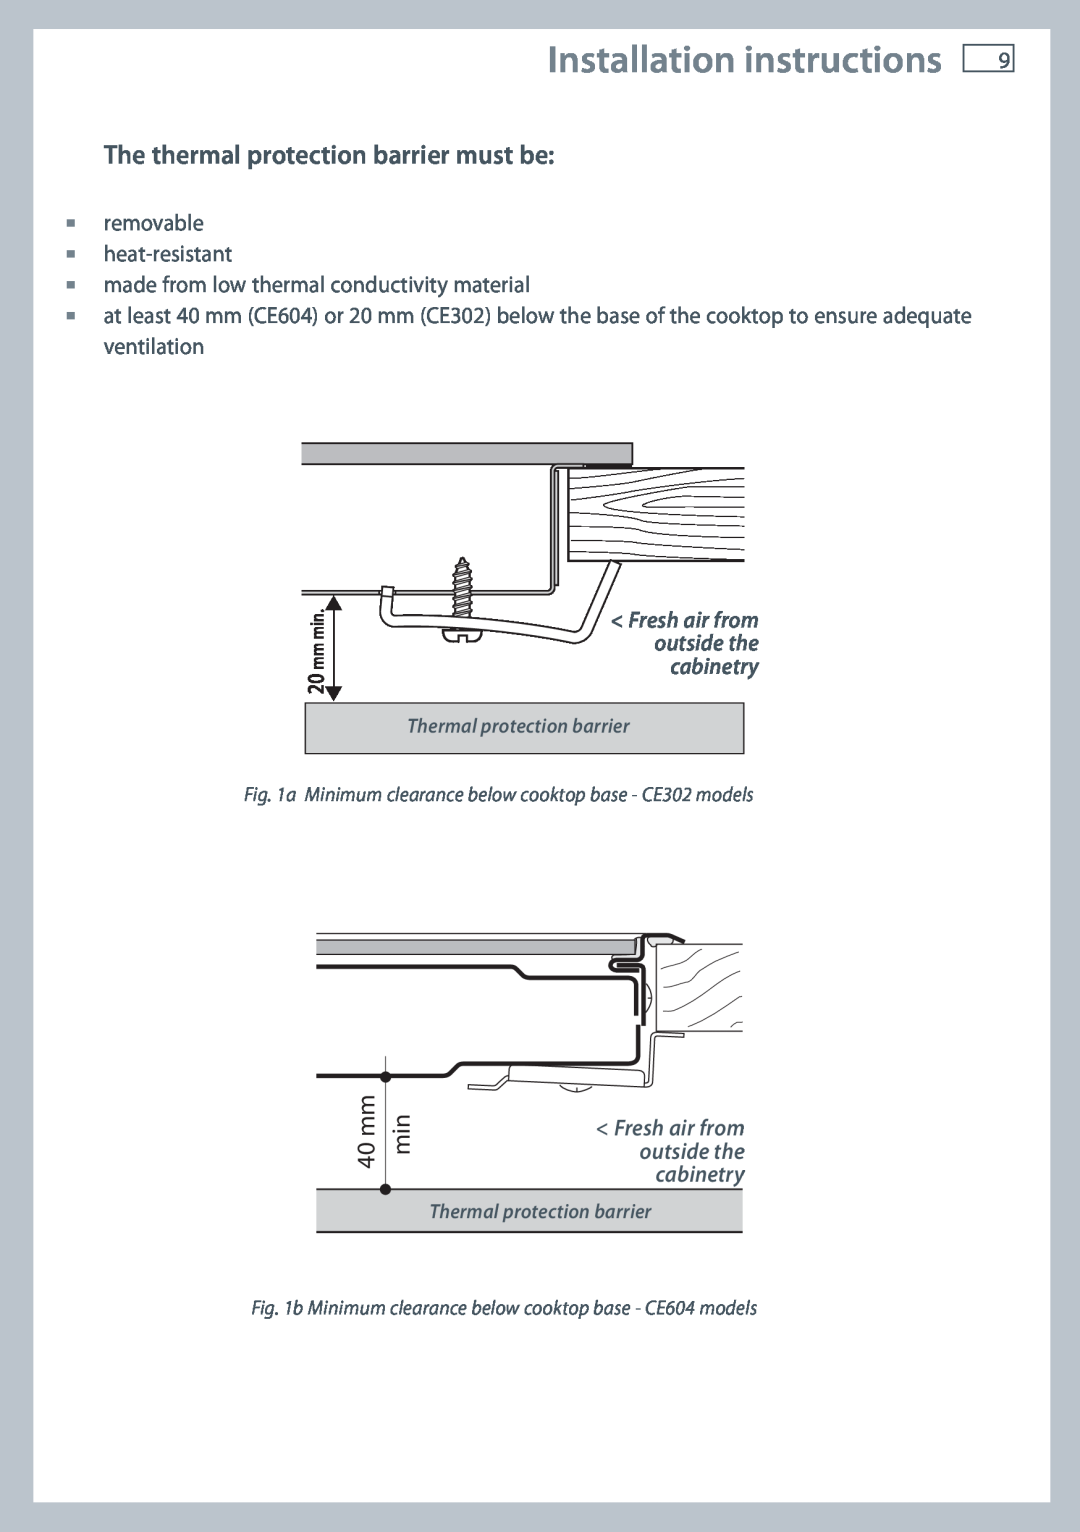 Fisher & Paykel CE604 The thermal protection barrier must be, 40 mm, Installation instructions, removable heat-resistant 